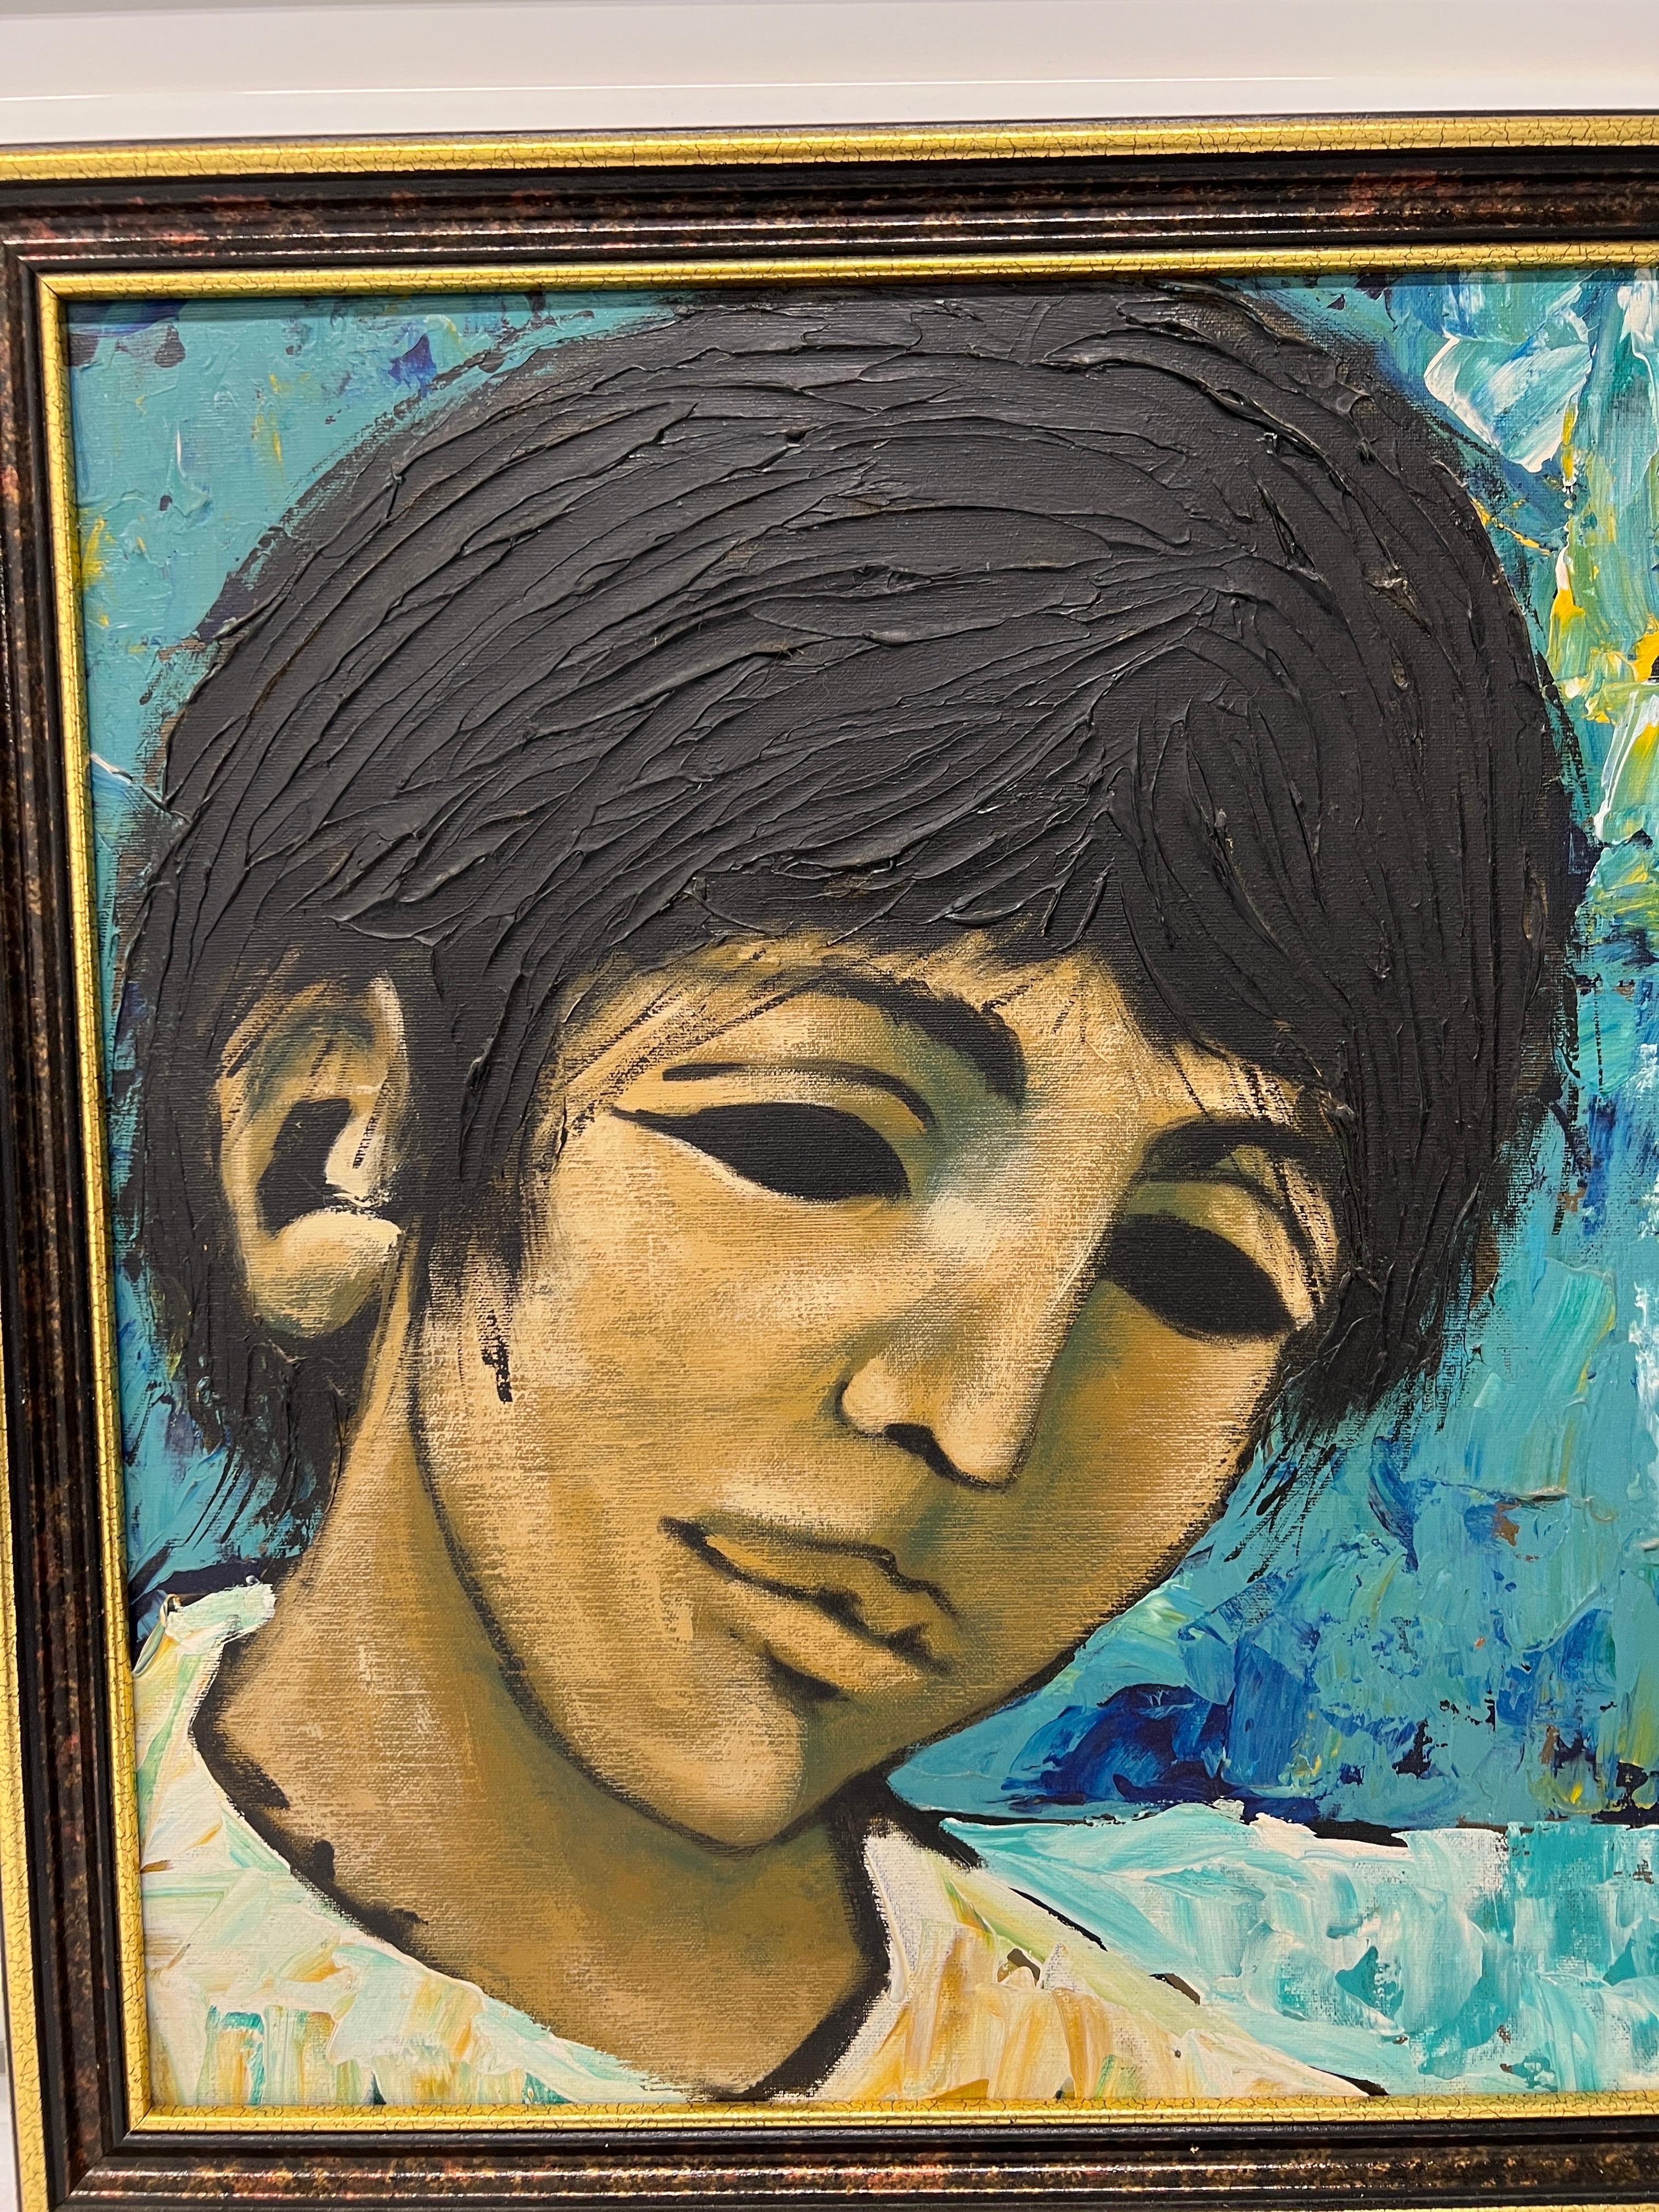 Spanish, 20th century.

A vintage oil painting depicting a young boy. The artist used a wonderful array of colors to accent the boy's profile. Signed to lower right. 